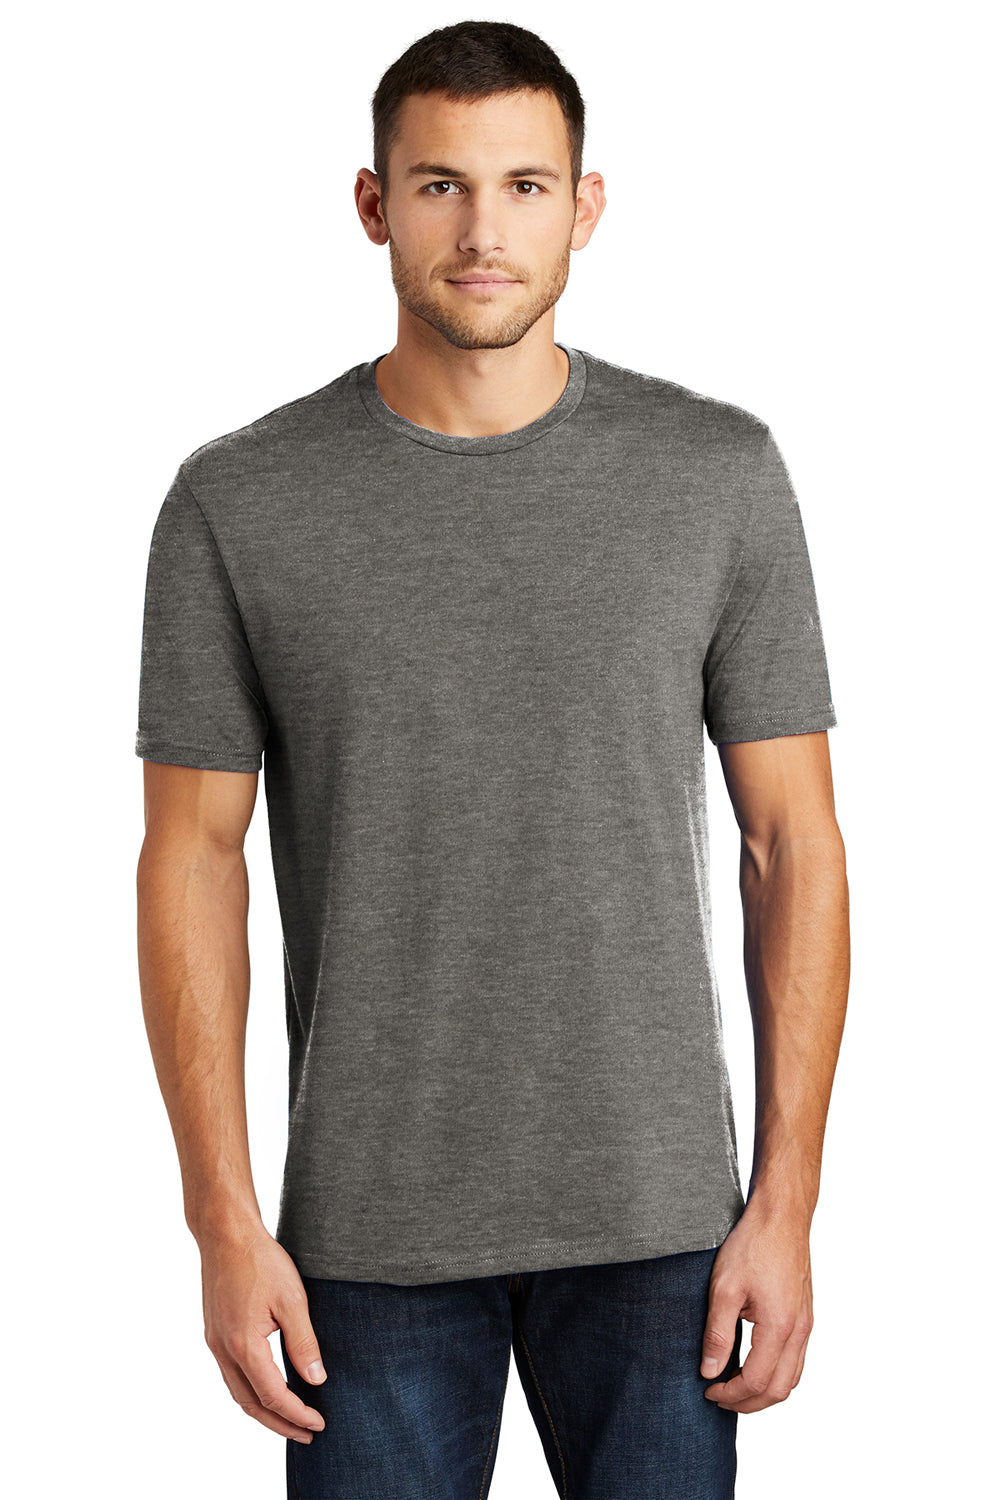 District DT104 Mens Perfect Weight Short Sleeve Crewneck T-Shirt Heather Charcoal Grey Front